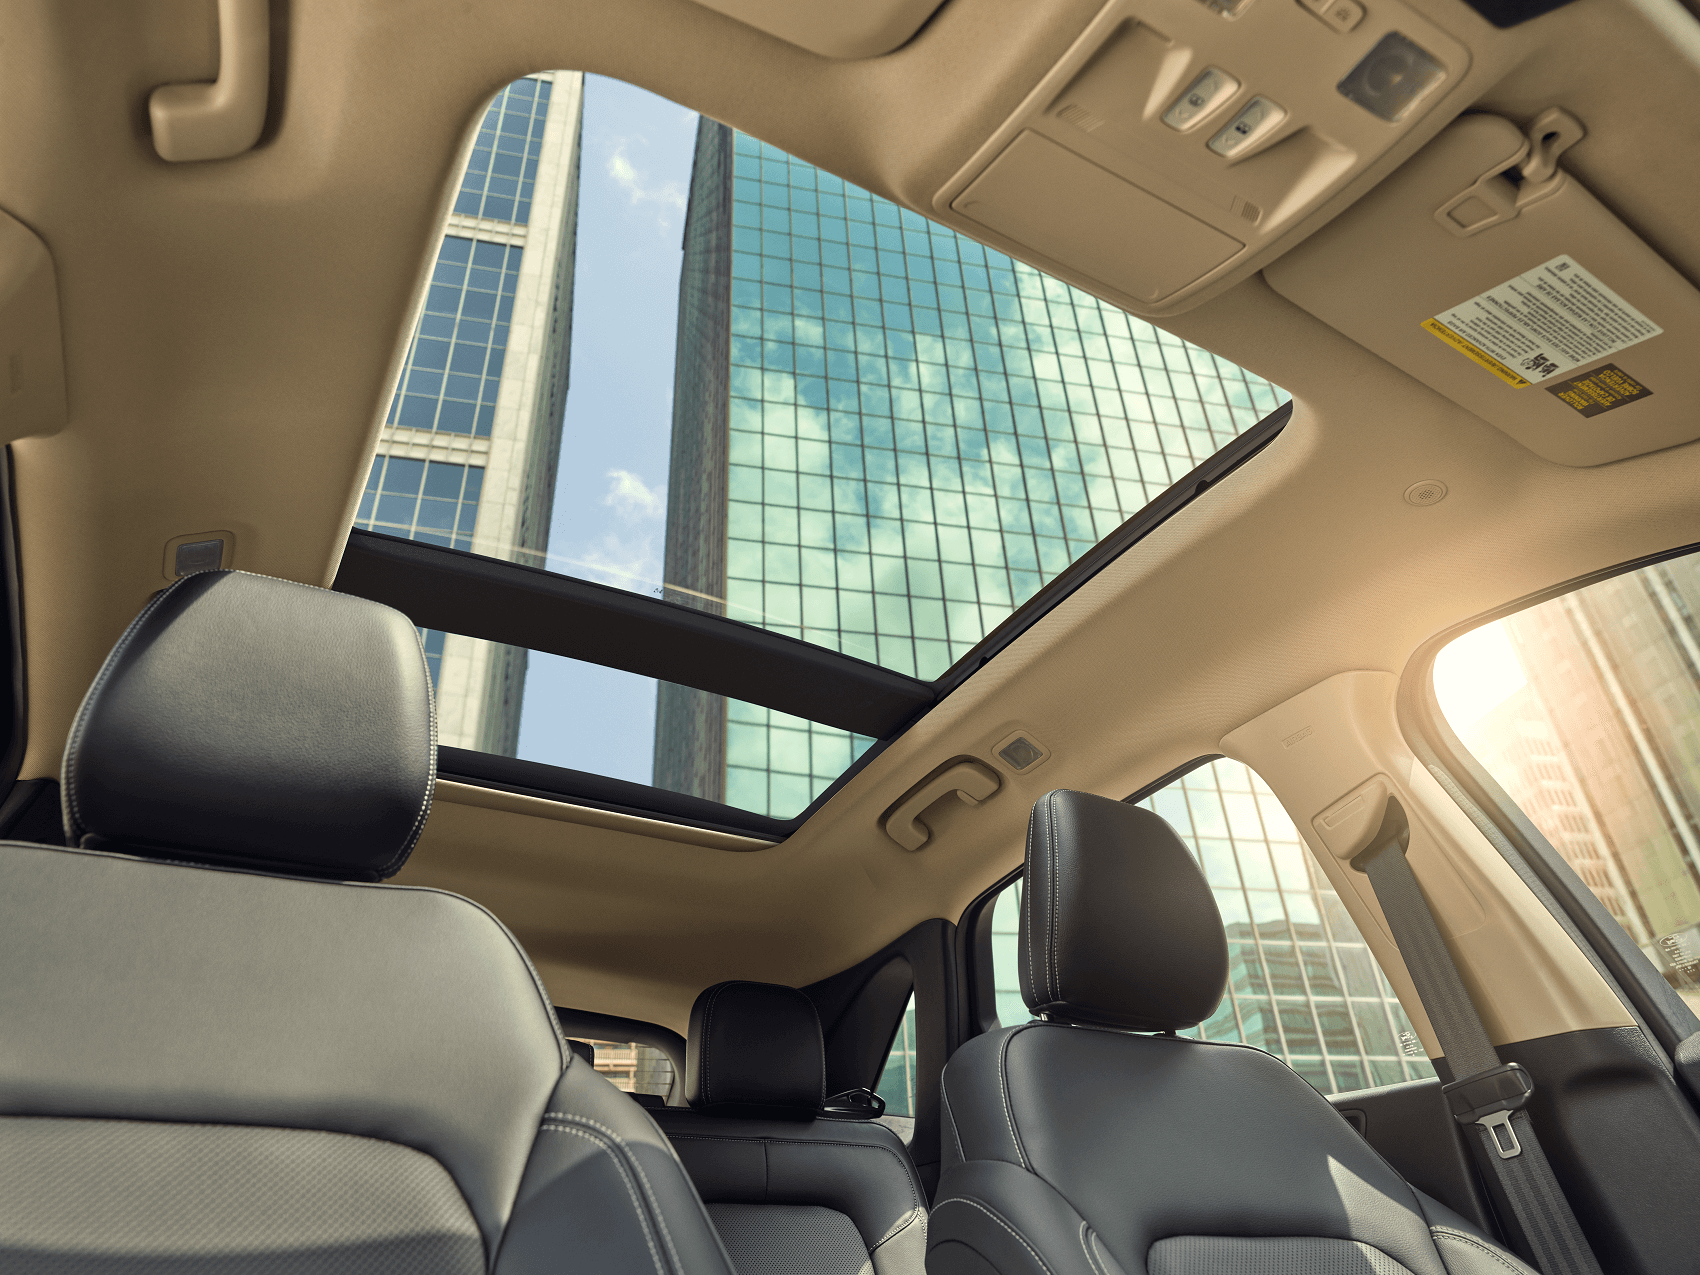 Ford Escape Panoramic Vista Roof